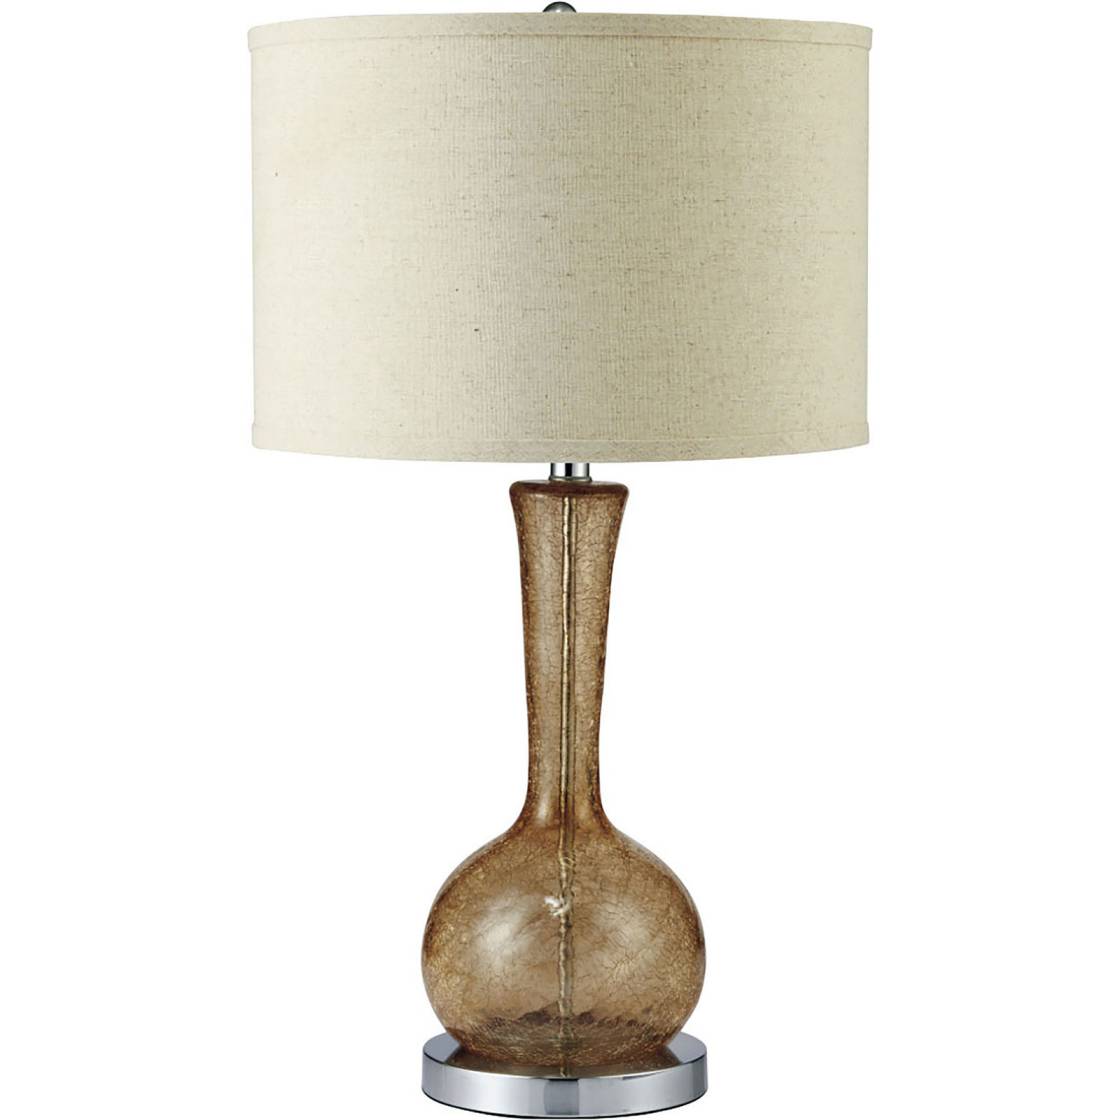 Florence Flask Shaped Table Lamp With Drum Shade, Silver And Brown By Benzara